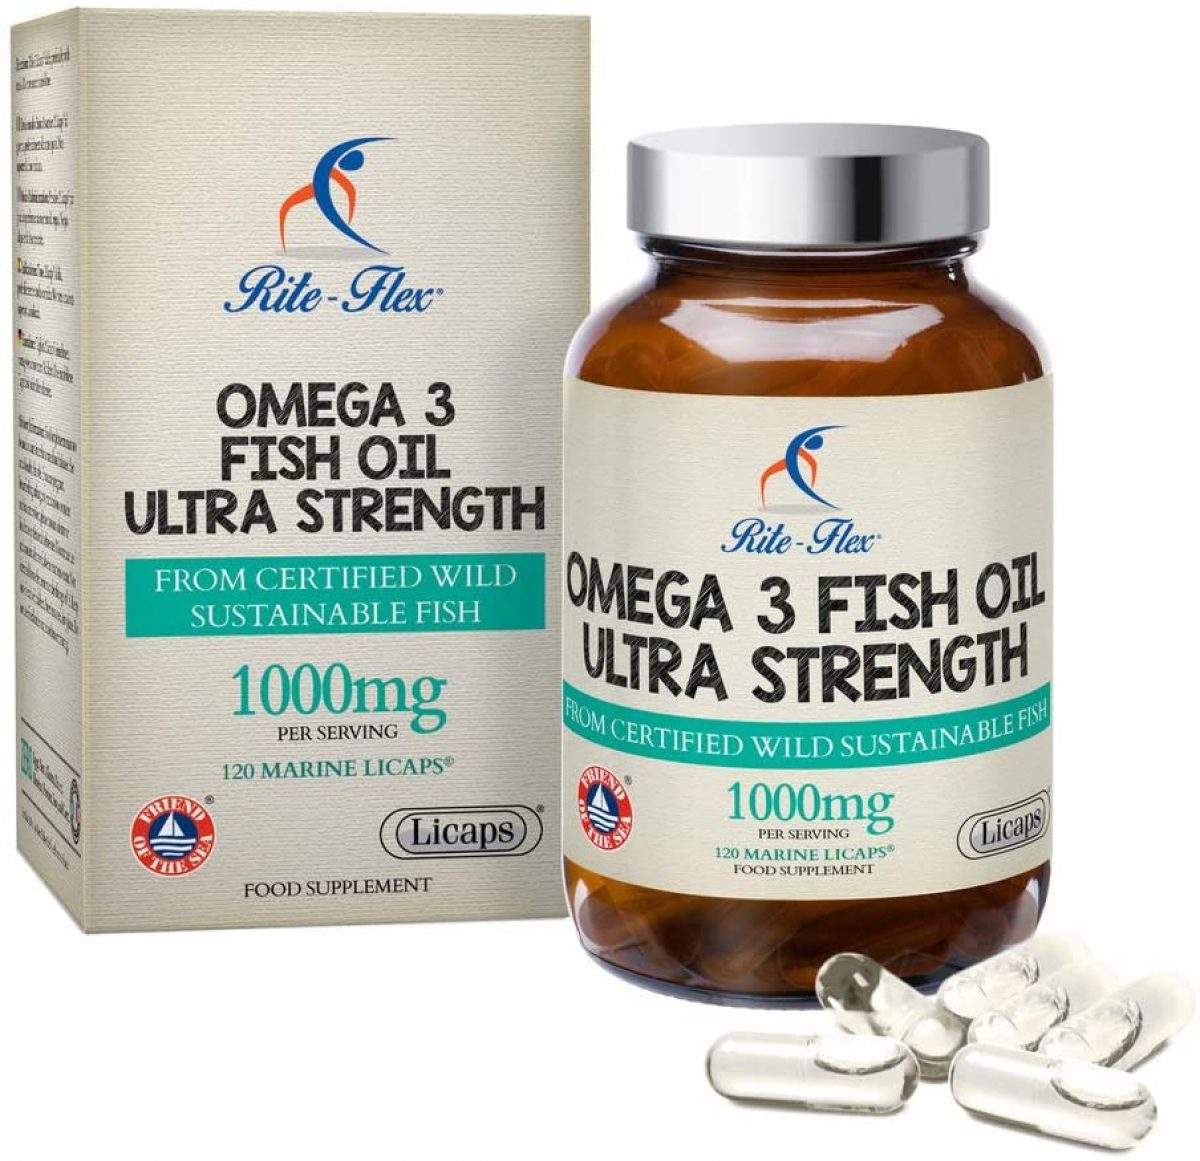 Omega 3 Fish Oil  Sustainable Omega 3 Supplements